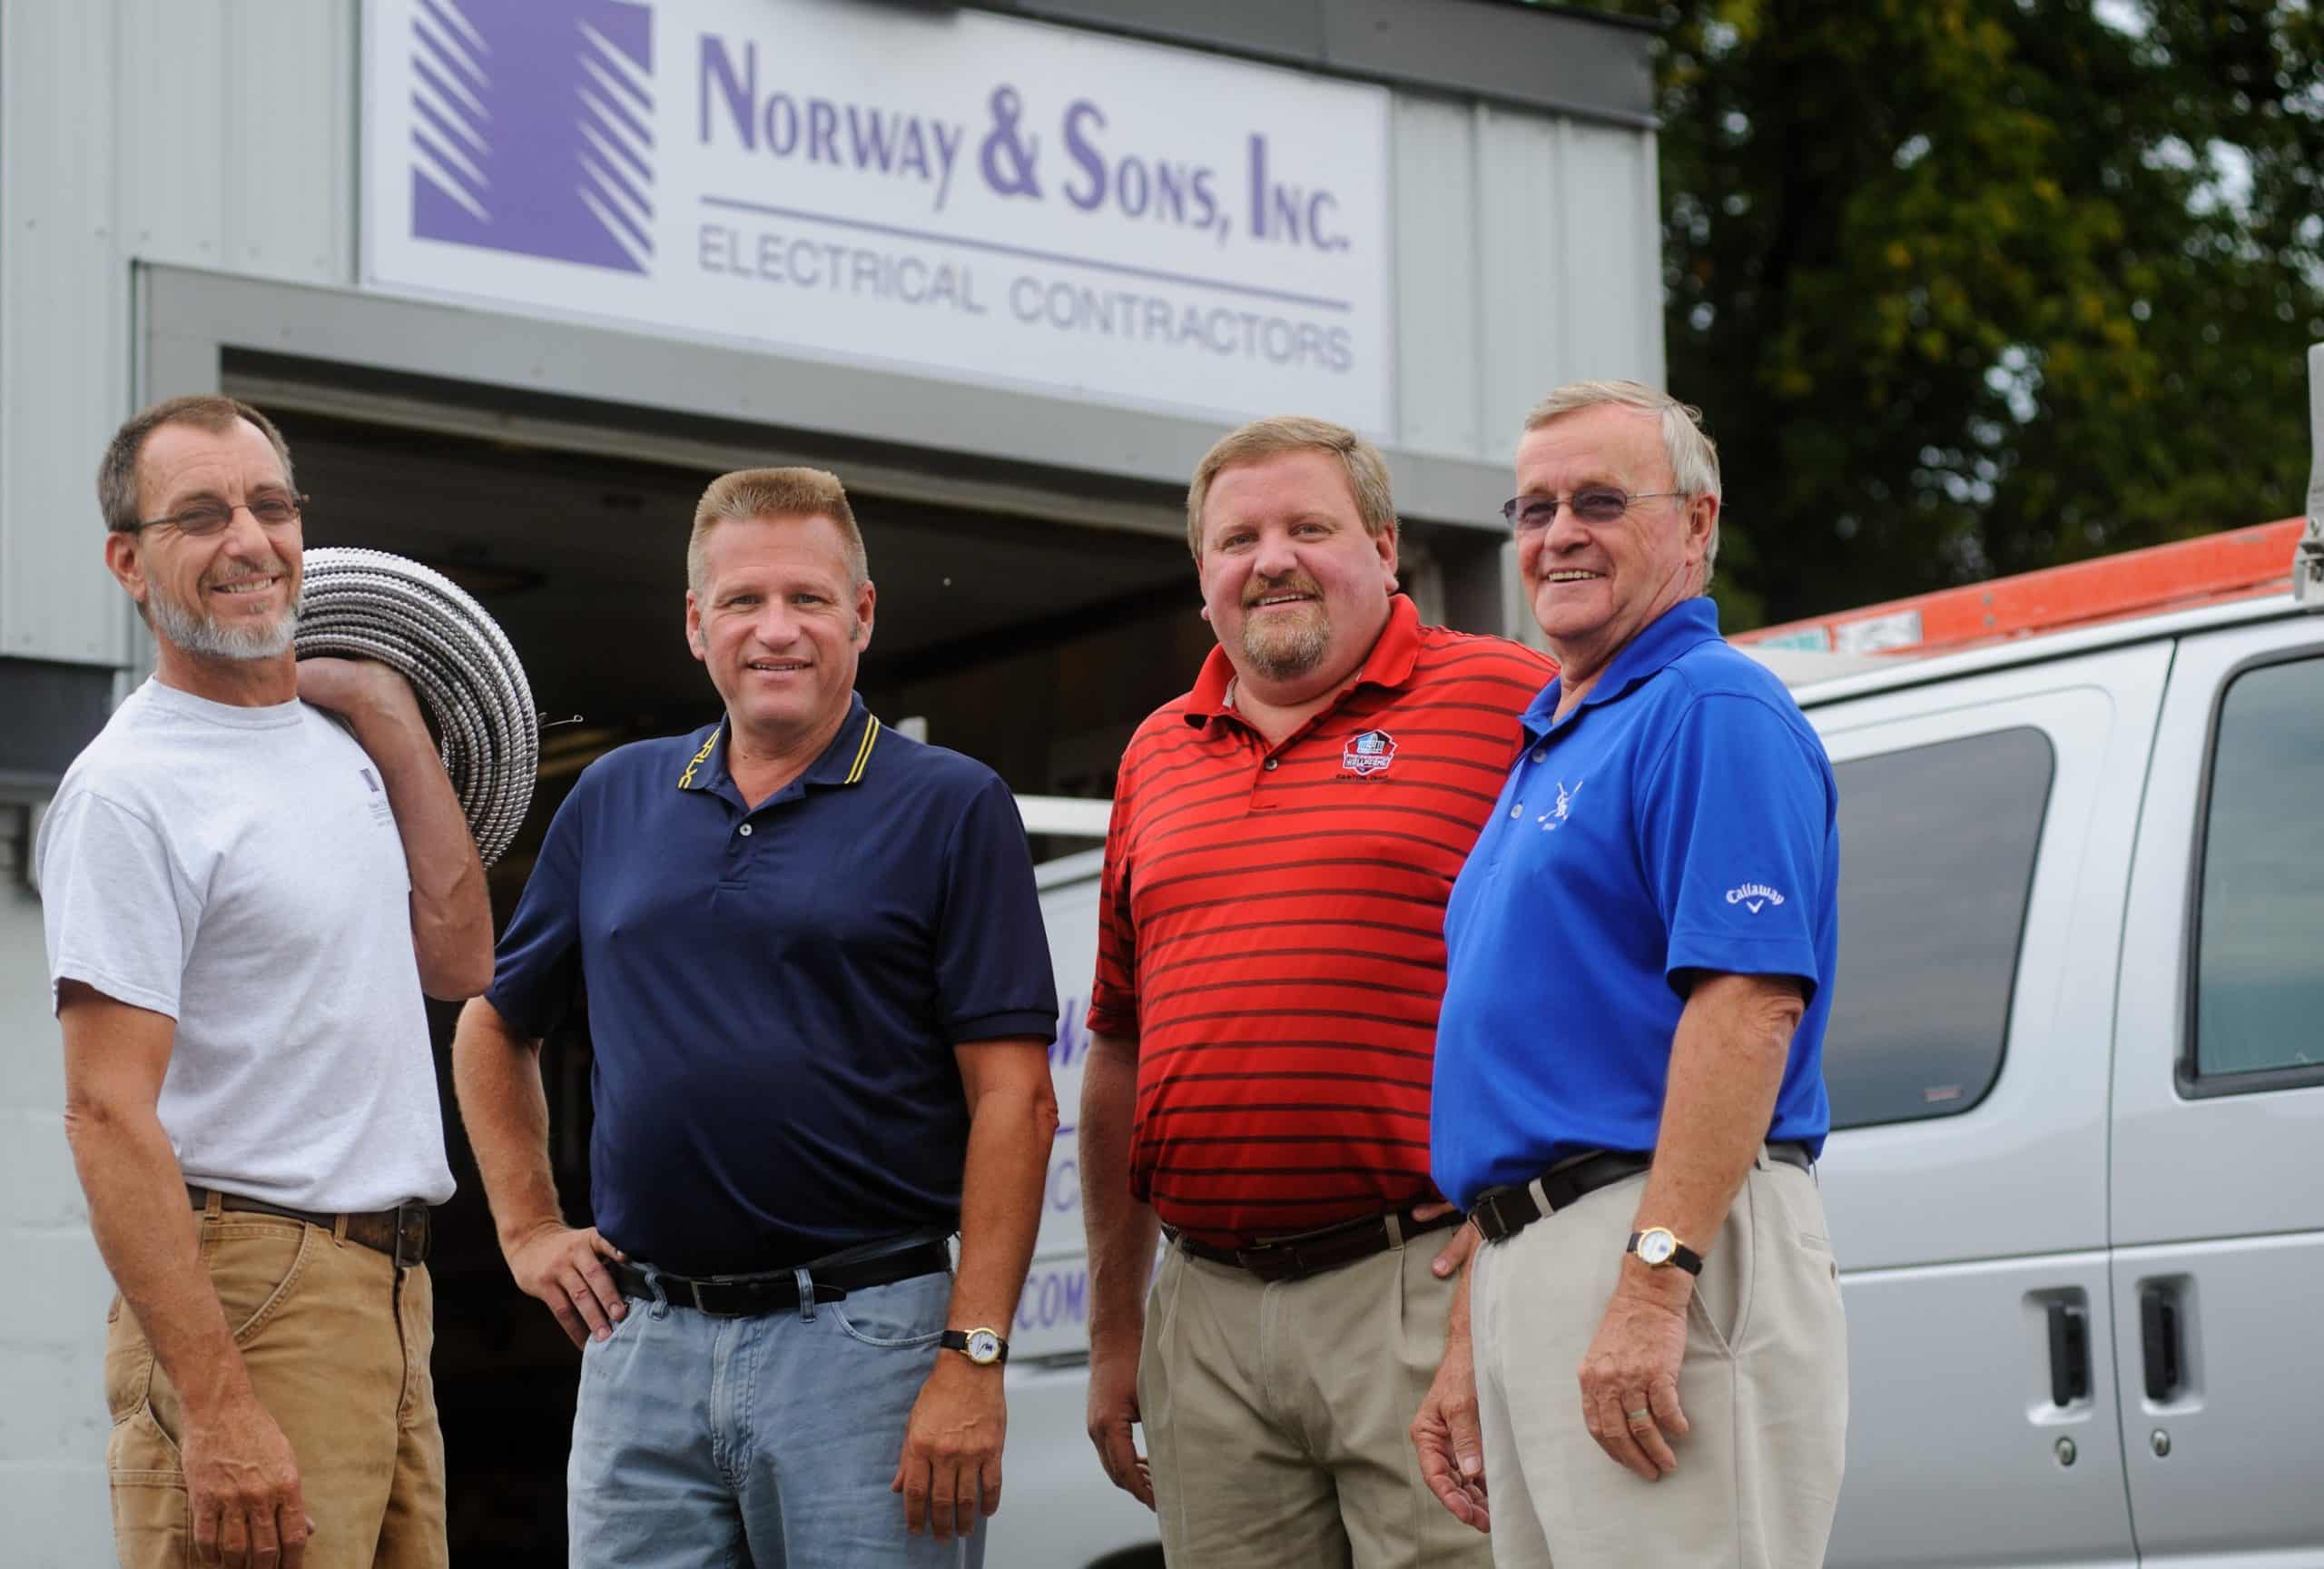 Norway & Sons owners in Barre Vt